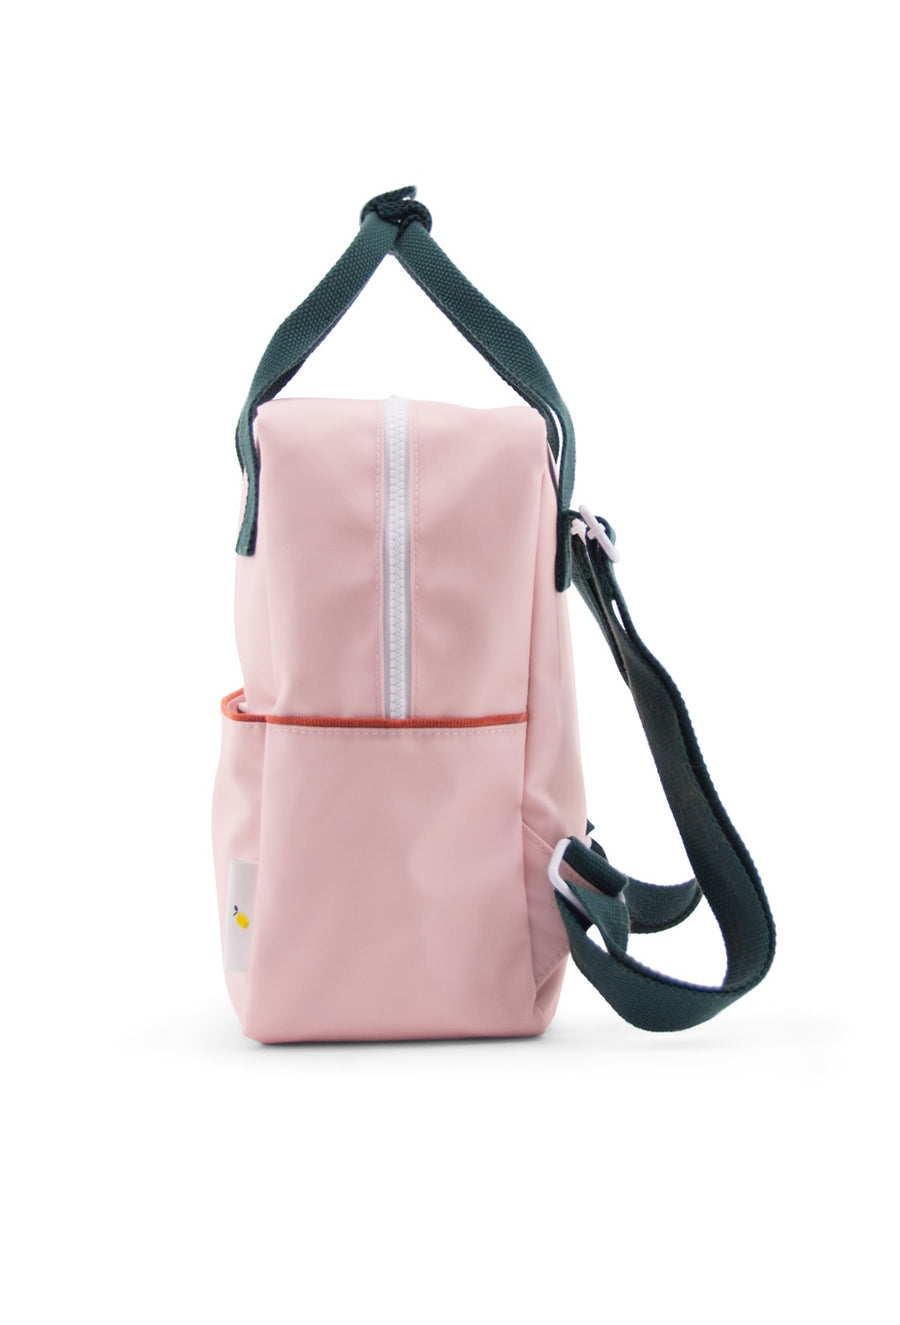 Sticky Lemon Corduroy Collection Small Backpack, Soft Pink